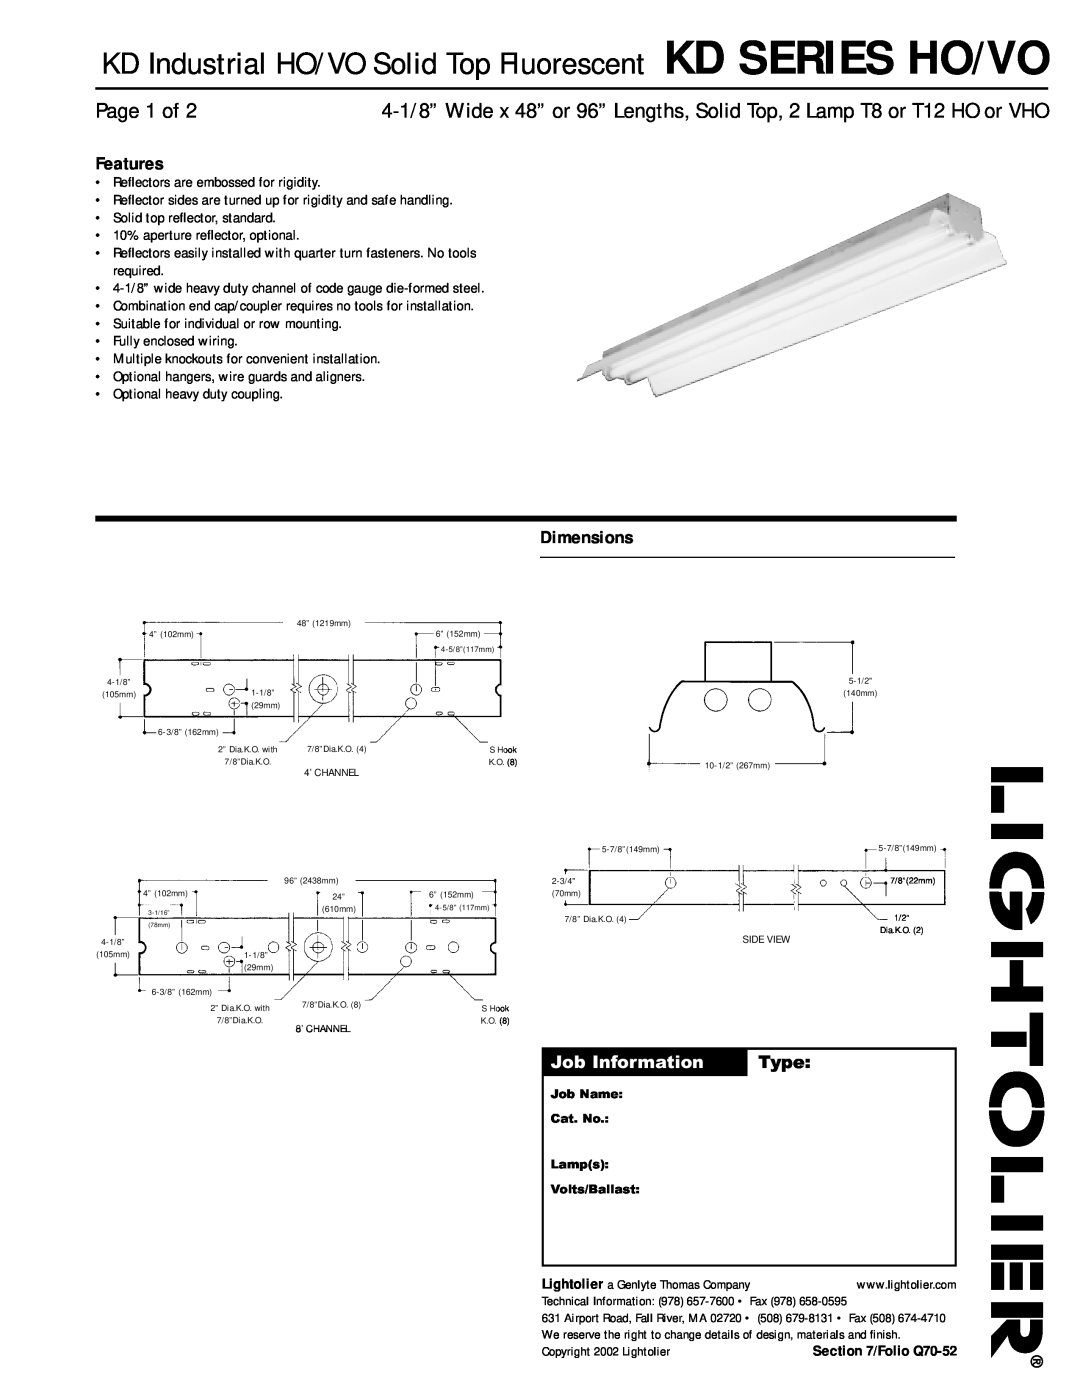 Lightolier KD SERIES HO, KD SERIES VO dimensions Page 1 of, Features, Dimensions, Job Information, Type 